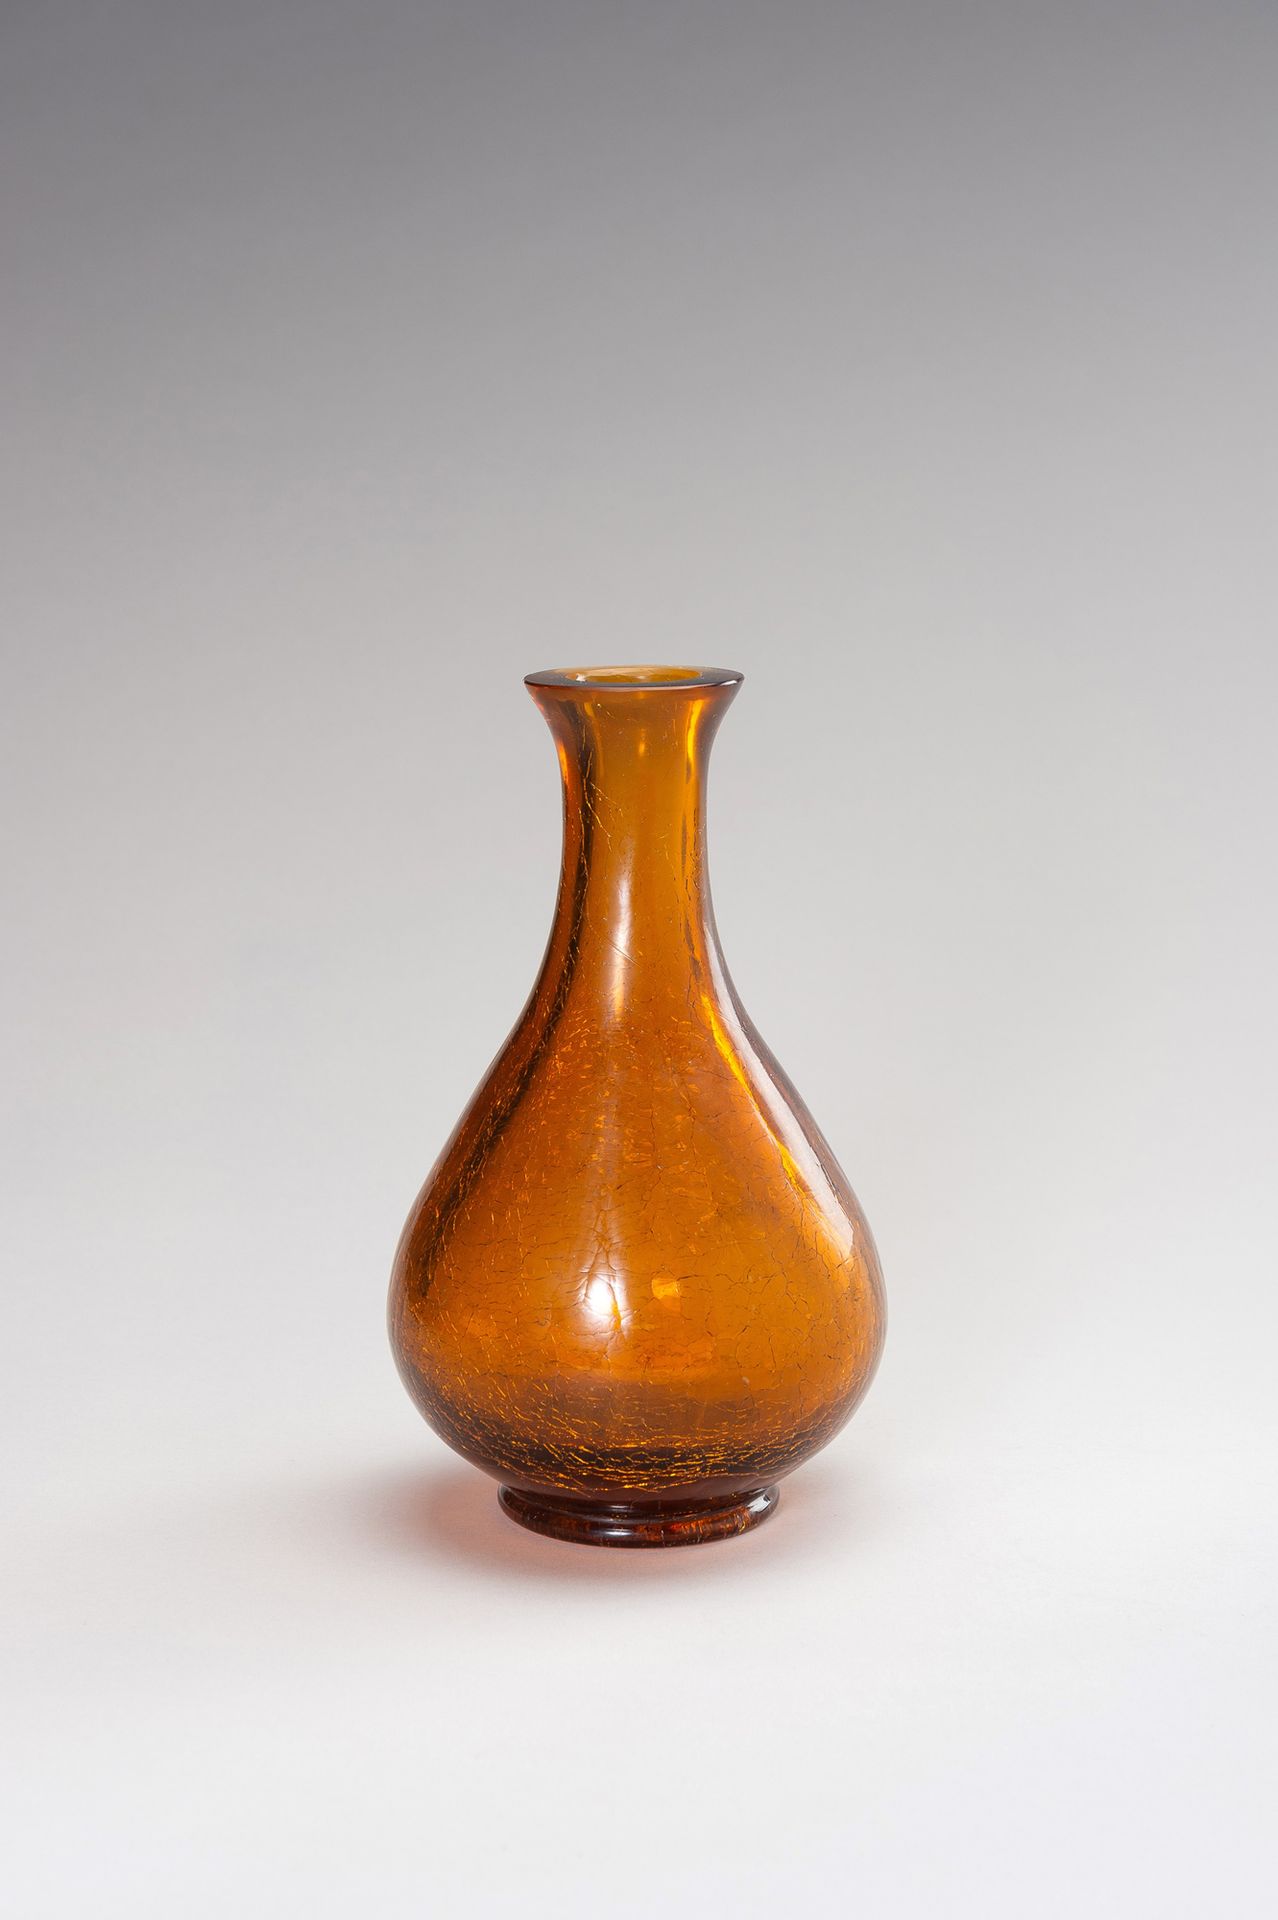 AN AMBER CRACKLE GLASS VASE AN AMBER CRACKLE GLASS VASE
China, late Qing Dynasty&hellip;